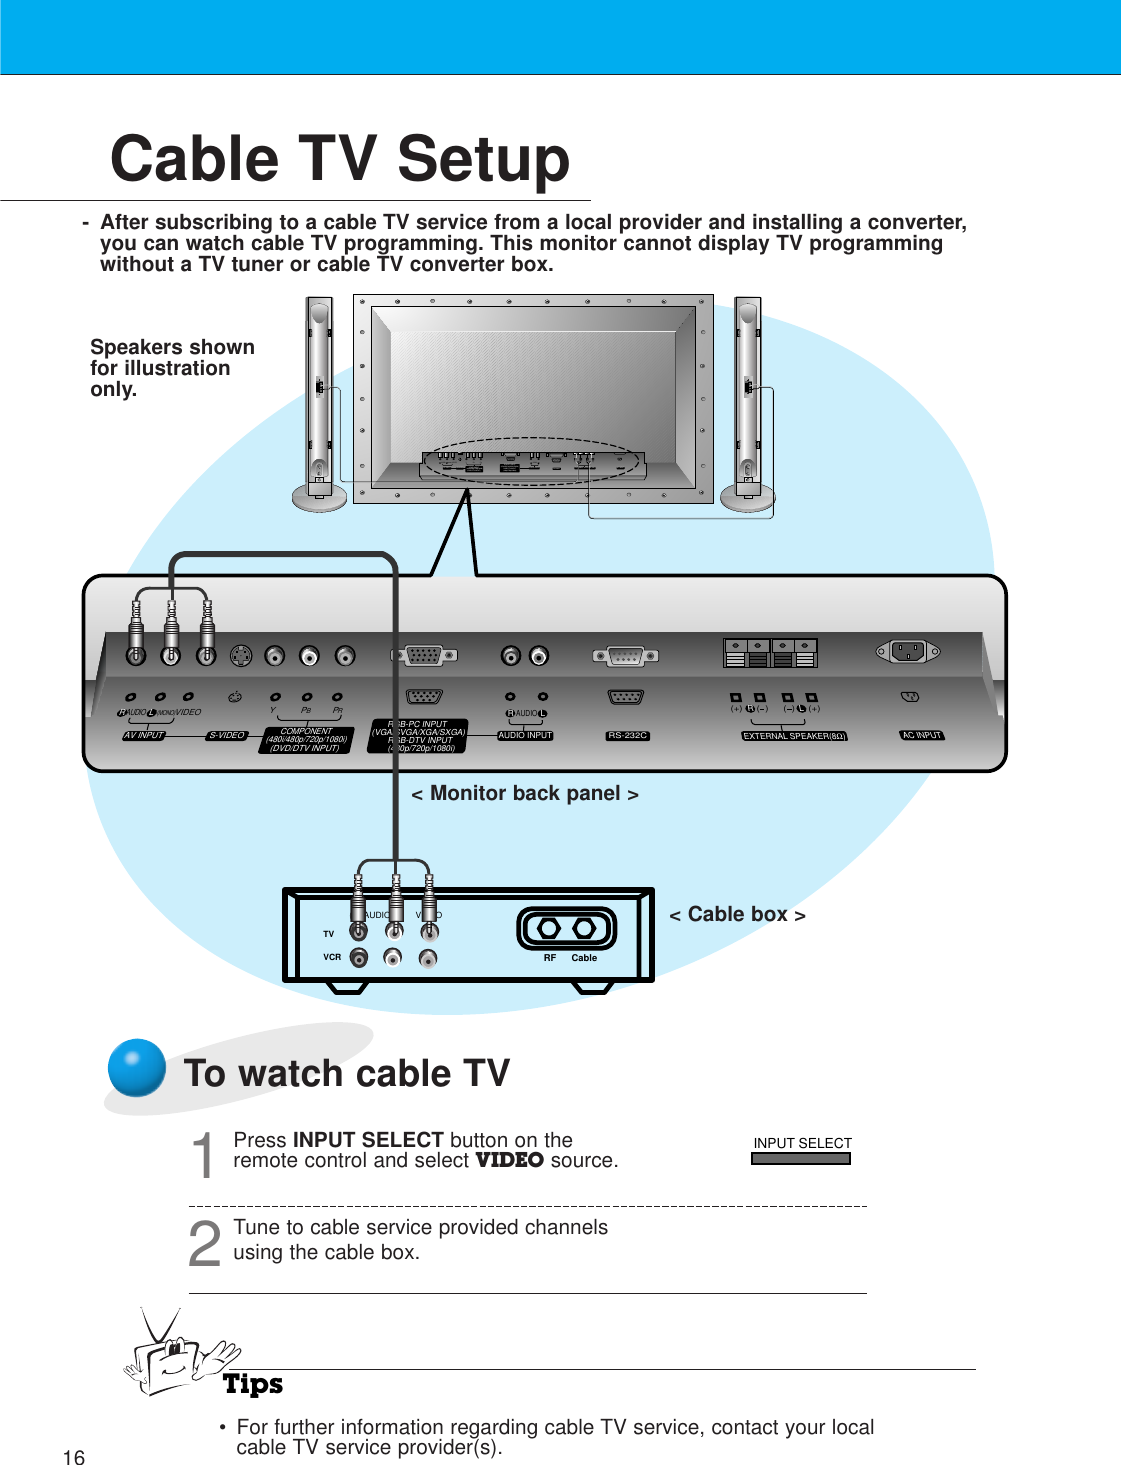 16Cable TV Setup- After subscribing to a cable TV service from a local provider and installing a converter,you can watch cable TV programming. This monitor cannot display TV programmingwithout a TV tuner or cable TV converter box.TVVCR RF Cable (R) AUDIO (L) VIDEO(+) (  ) (+)(  )AUDIO(MONO)R L VIDEO Y PB RPAV INPUTAUDIOR L RLEXTERNAL SPEAKER (8Ω) AC INPUTAUDIO INPUTS-VIDEO COMPONENT(480i/480p/720p/1080i)RGB-PC INPUT(VGA/SVGA/XGA/SXGA)RGB-DTV INPUT(480p/720p/1080i)(DVD/DTV INPUT)(+) (  ) (+)(  )AUDIO(MONO)R LAV INPUT S-VIDEOCOMPONENT(480i/480p/720p/1080i)(DVD/DTV INPUT)RGB-PC INPUTRAUDIO INPUTEXTERNAL SPEAKER(8Ω)R LAC INPUTLAUDIO(VGA/SVGA/XGA/SXGA)RGB-DTV INPUT(480p/720p/1080i)VIDEO YPBPRRS-232CRS-232CTo watch cable TVPress INPUT SELECT button on theremote control and select VIDEO source.1Tune to cable service provided channelsusing the cable box.2Tips•For further information regarding cable TV service, contact your localcable TV service provider(s).&lt; Monitor back panel &gt;&lt; Cable box &gt;Speakers shownfor illustrationonly.INPUT SELECT